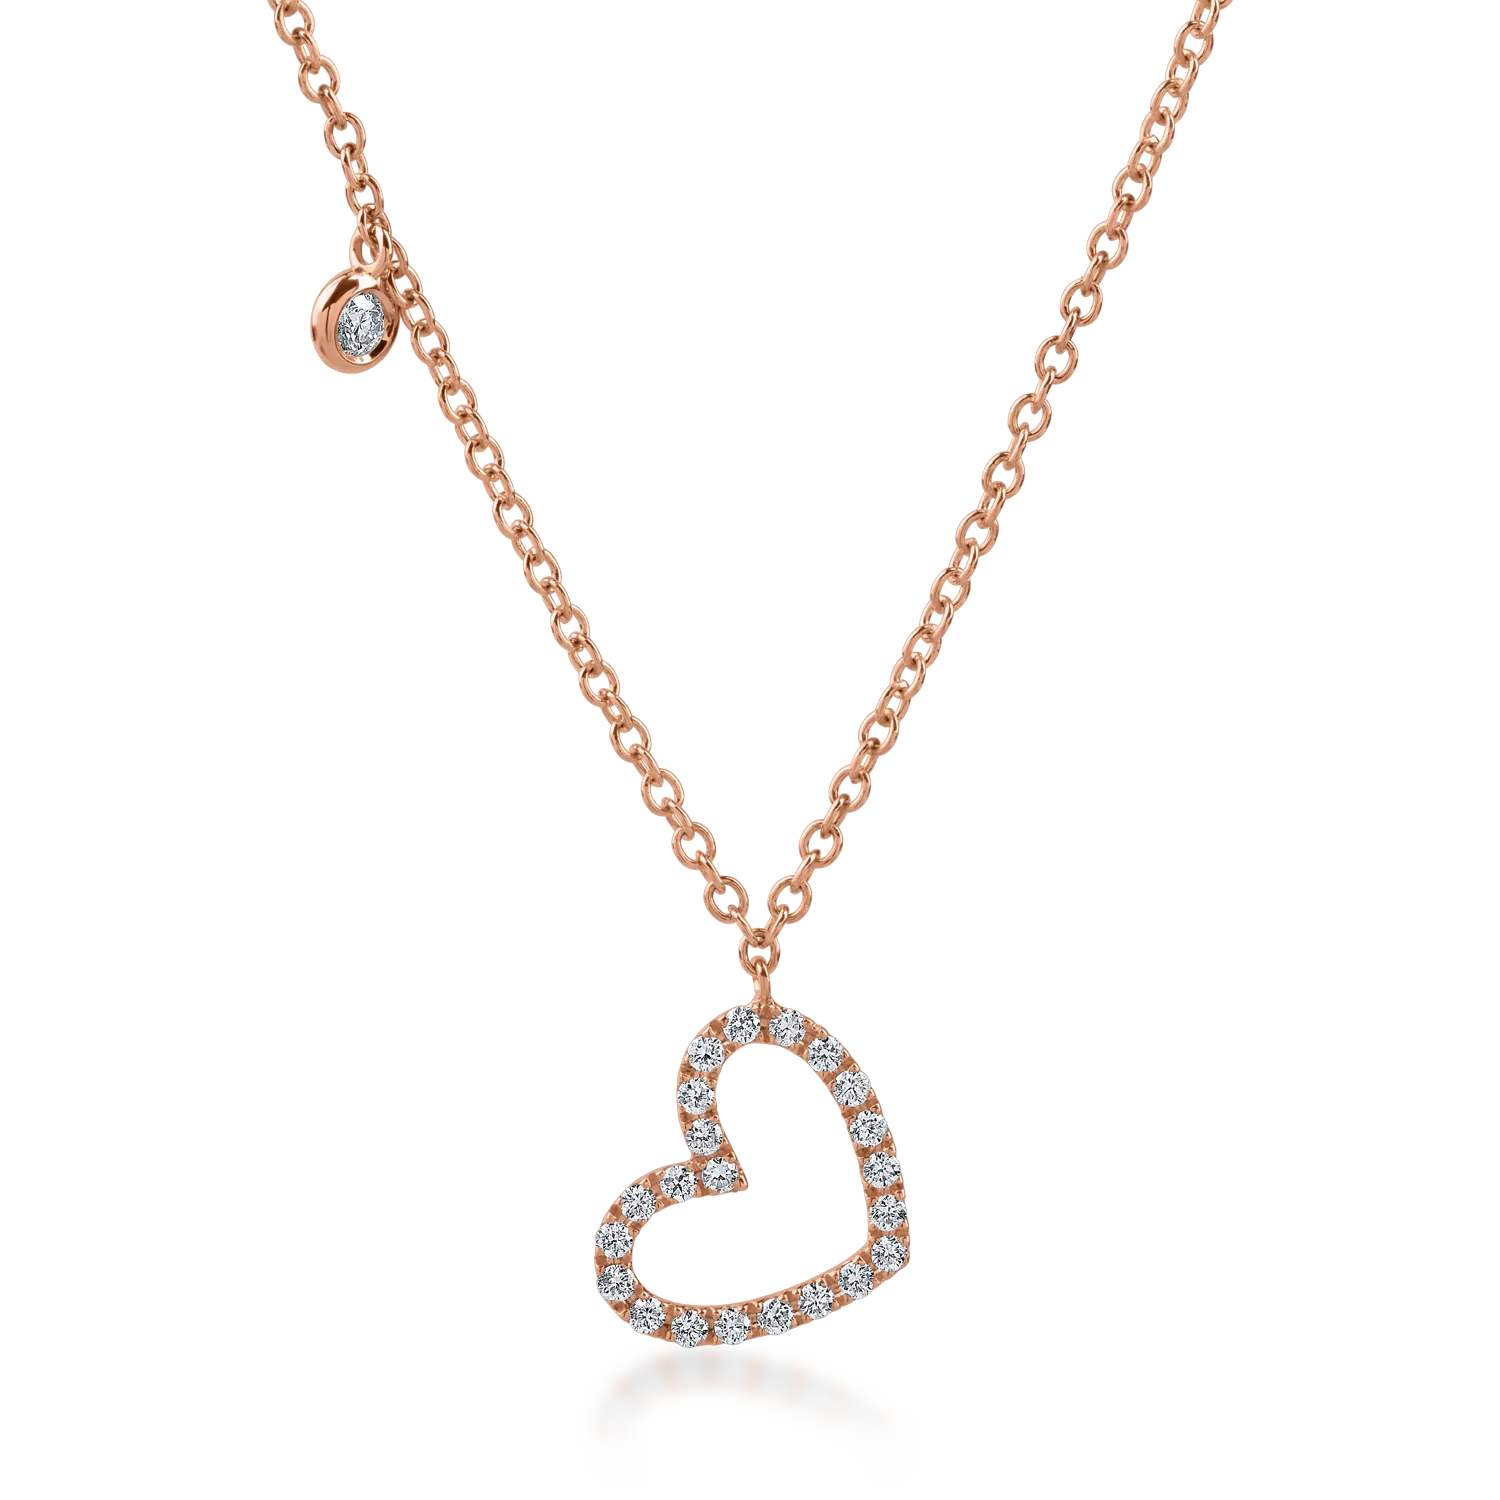 Rose gold heart pendant necklace with 0.18ct diamonds